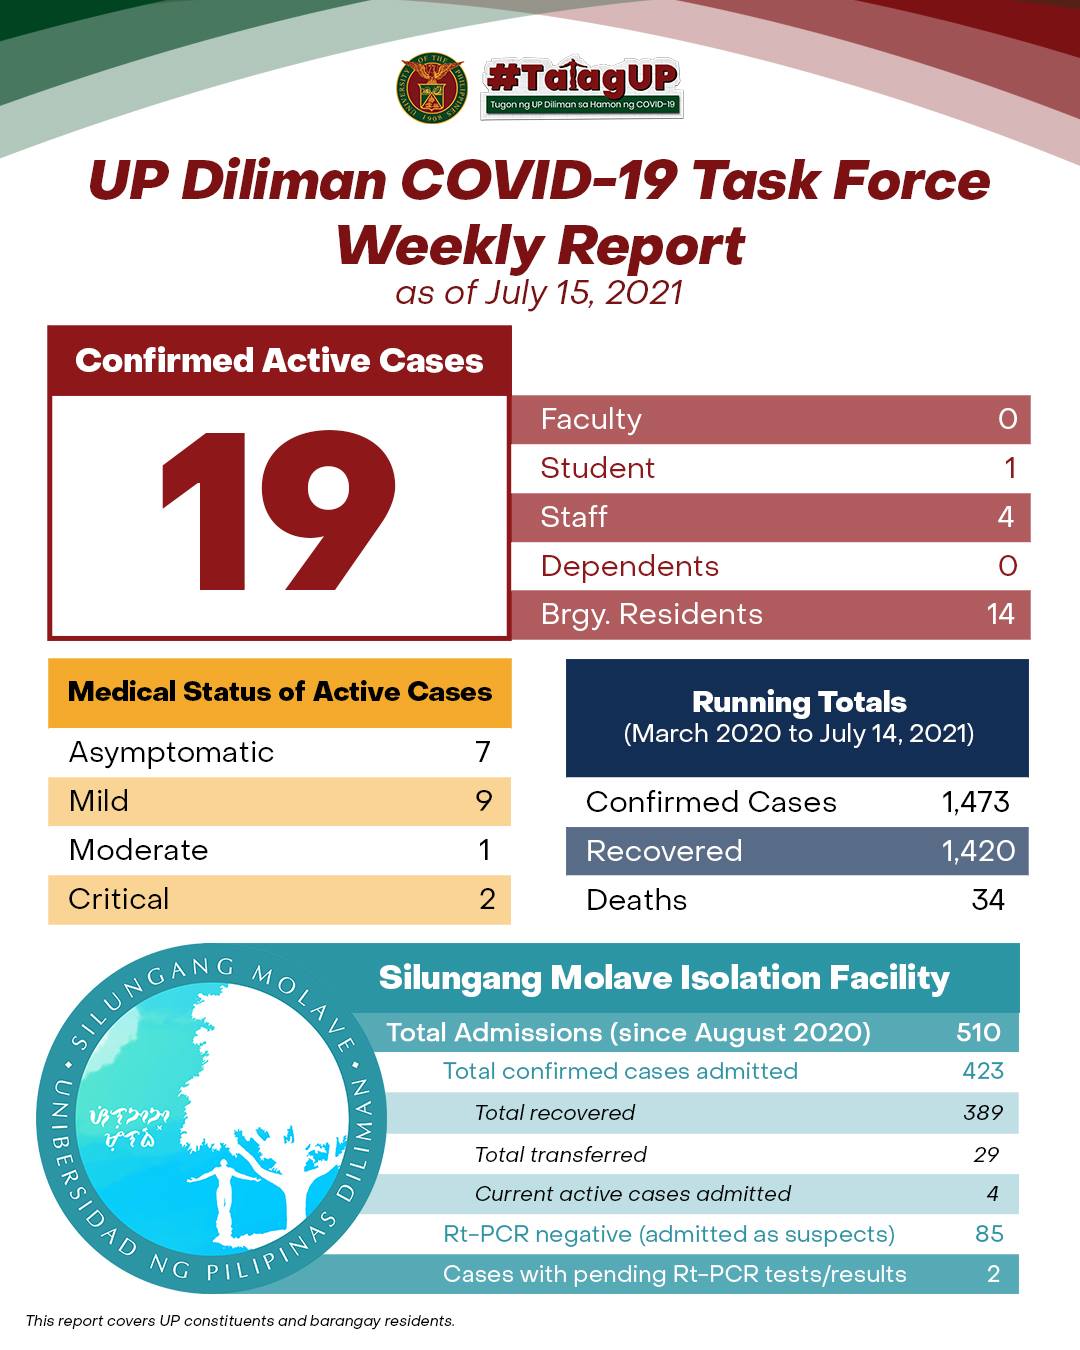 UP Diliman COVID-19 Task Force Weekly Report as of July 15, 2021